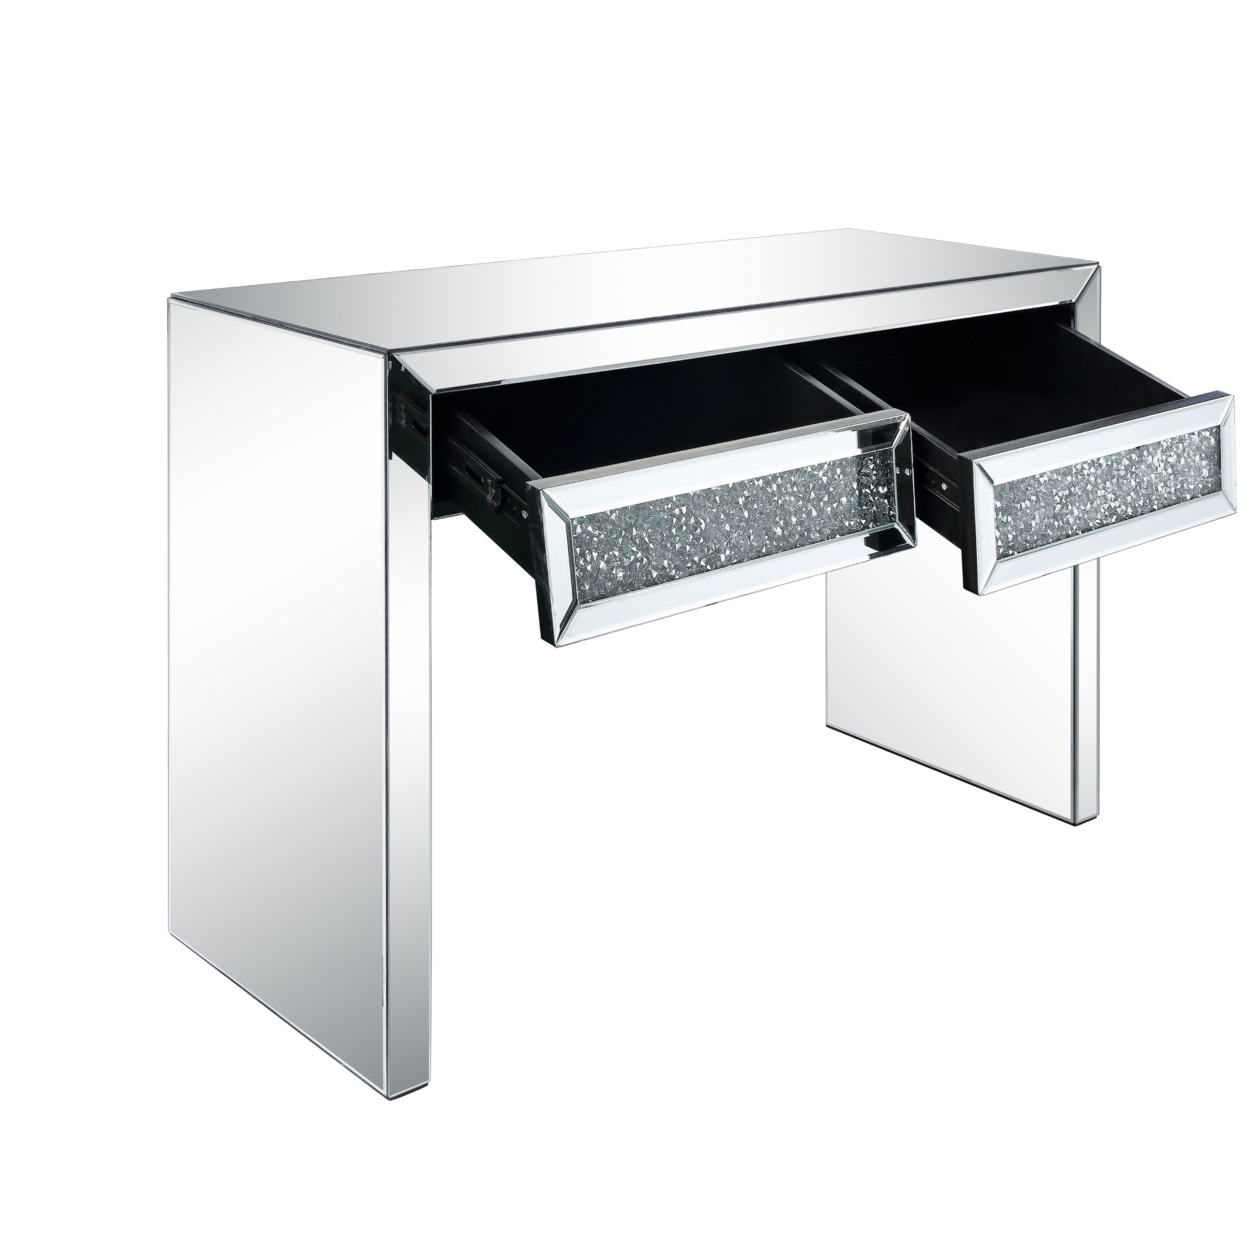 Console Table With Two Storage Drawers And Faux Diamond Inlay, Silver- Saltoro Sherpi